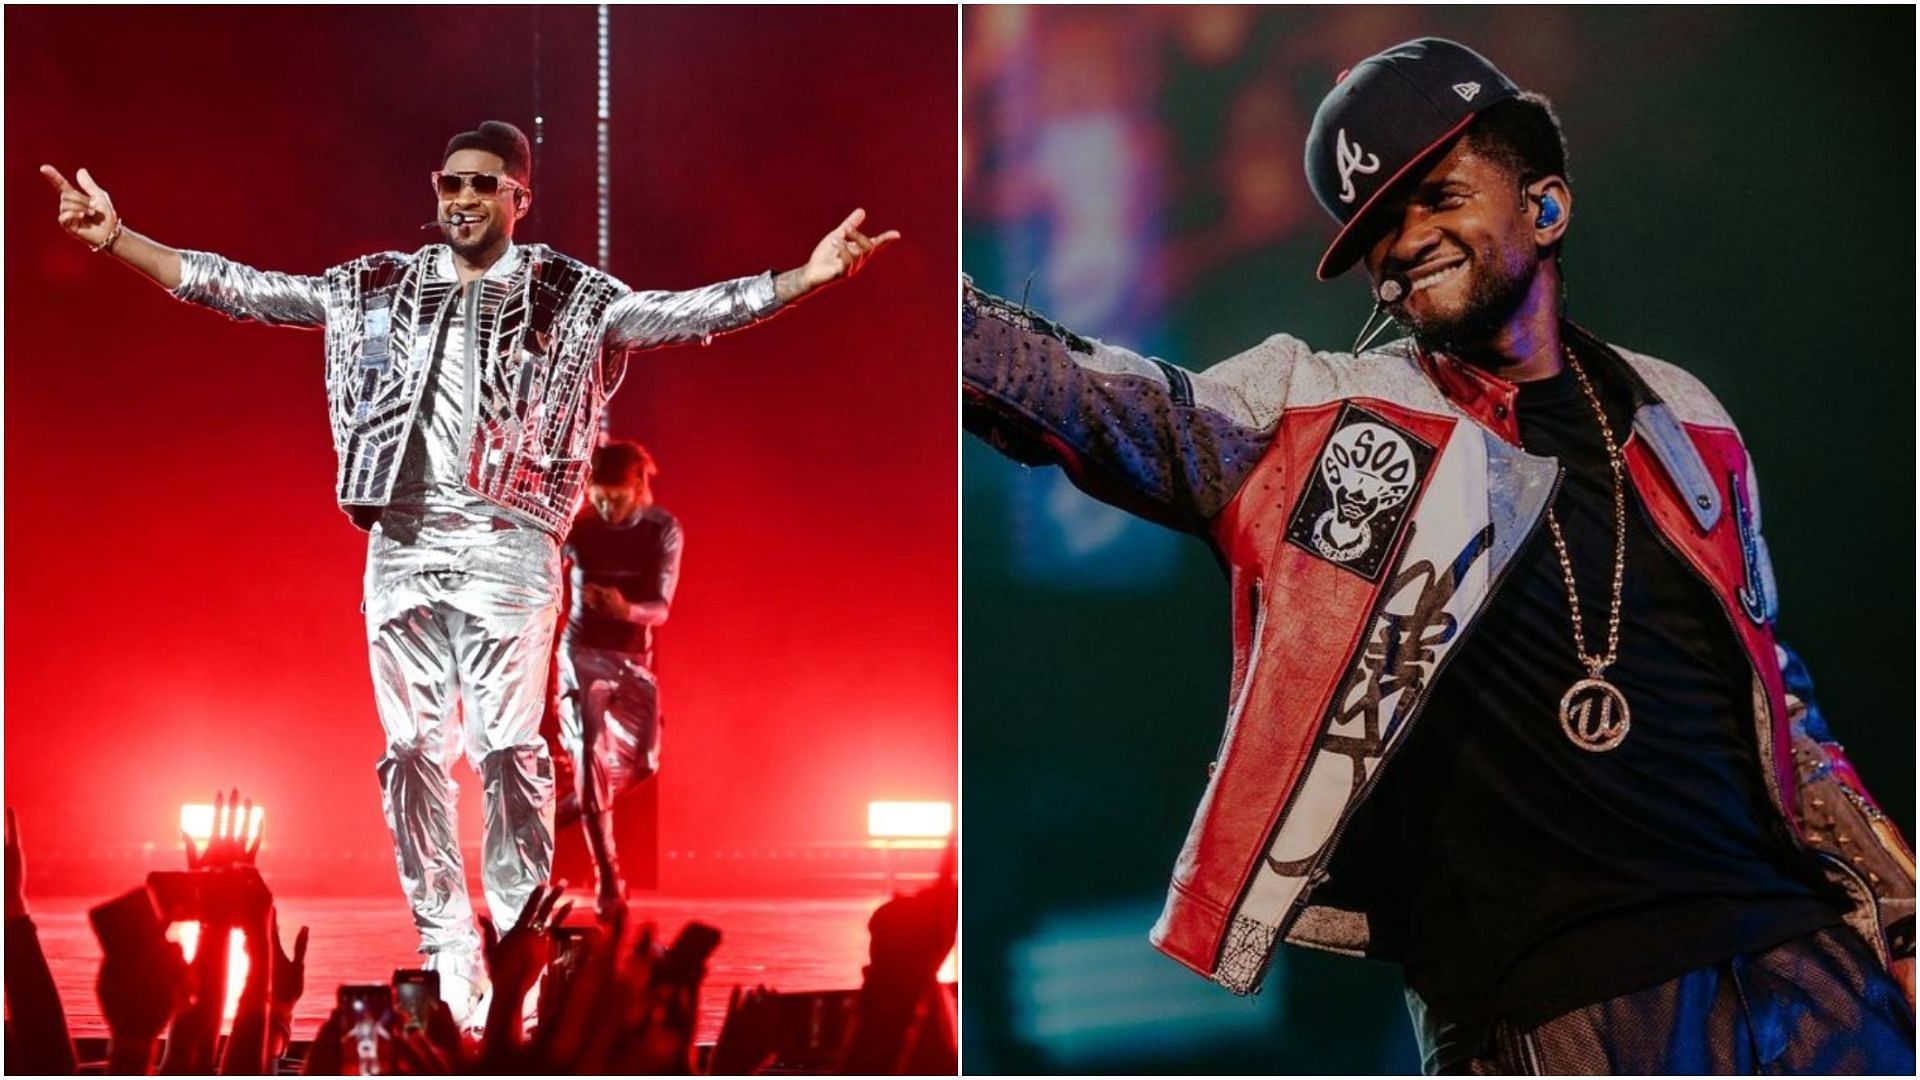 Usher has announced additional dates for his residency. (Images via Instagram)